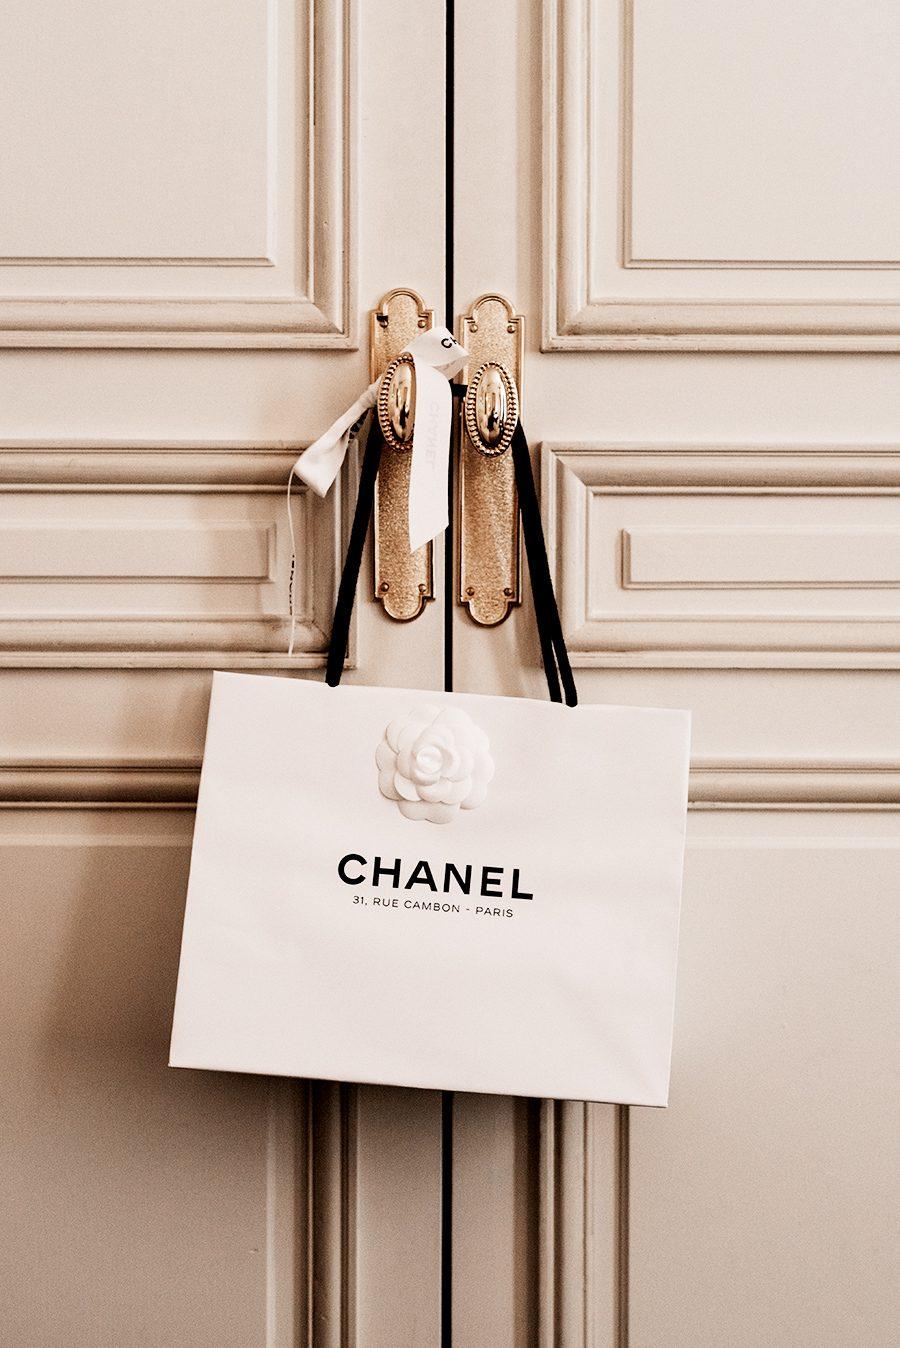 Gabrielle Chanel Paris Logo - Inside The Launch Of The New Gabrielle Chanel Fragrance | Not Your ...